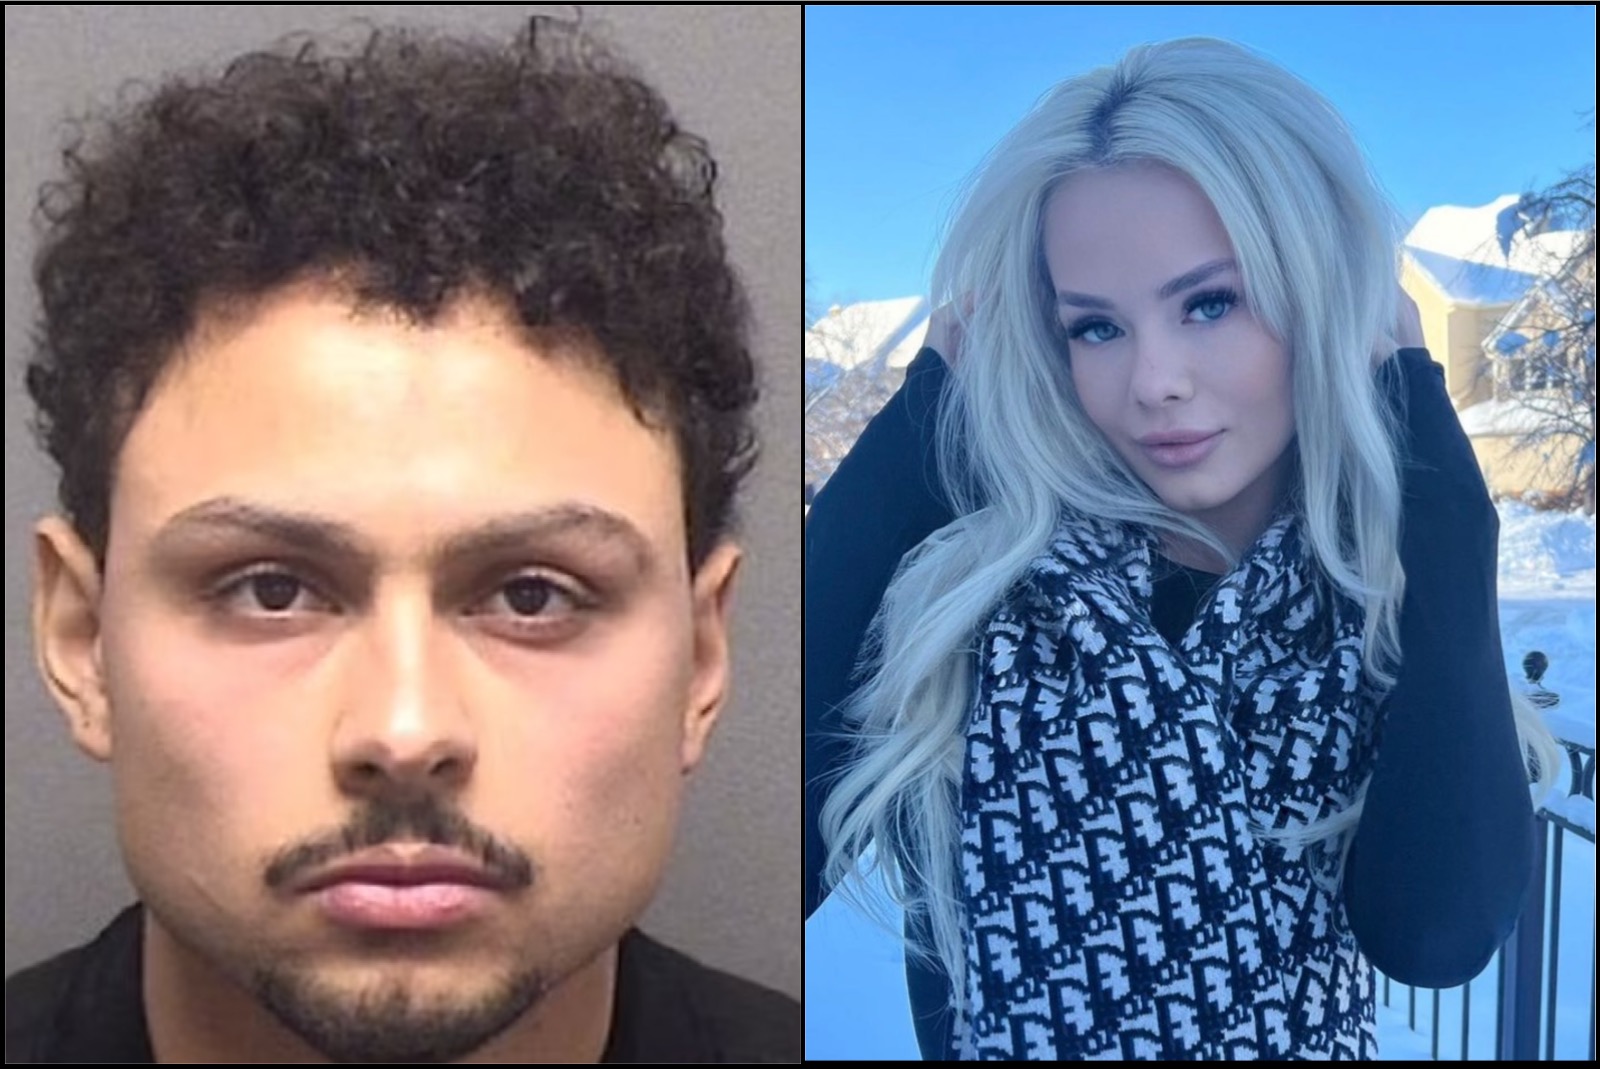 Photos of Adult Film Star Elsa Jean Who Was Assaulted By NBA Player Bryn  Forbes - Page 7 of 7 - BlackSportsOnline